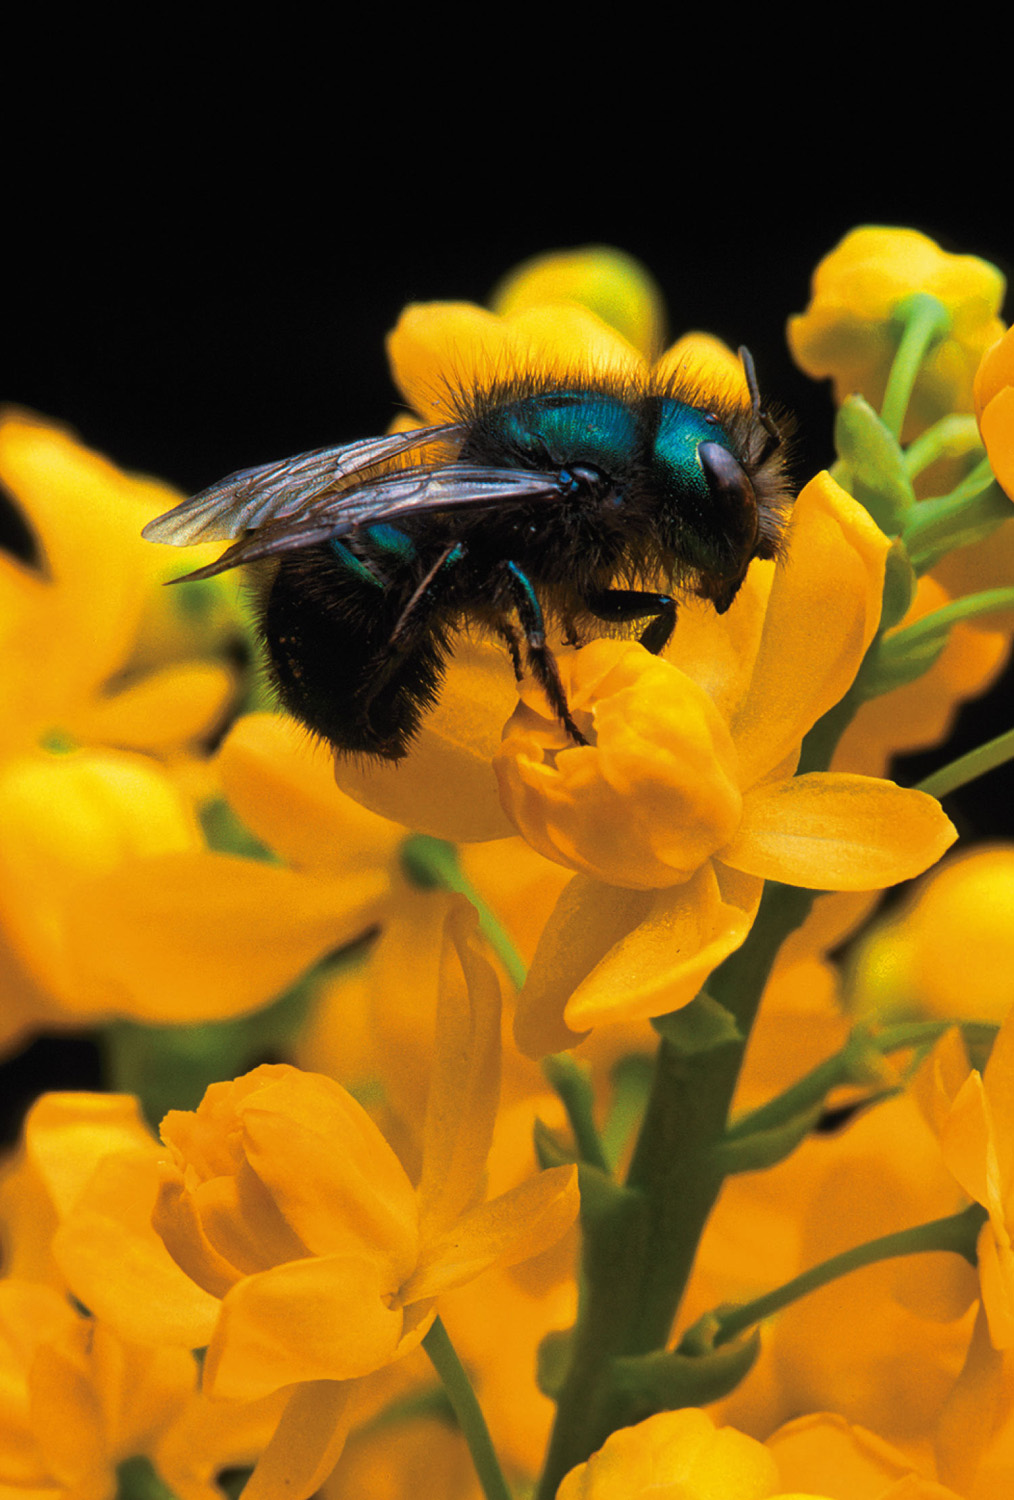 Blueberry bees (Osmia ribifloris) are efficient pollinators of a variety of plants, including this b